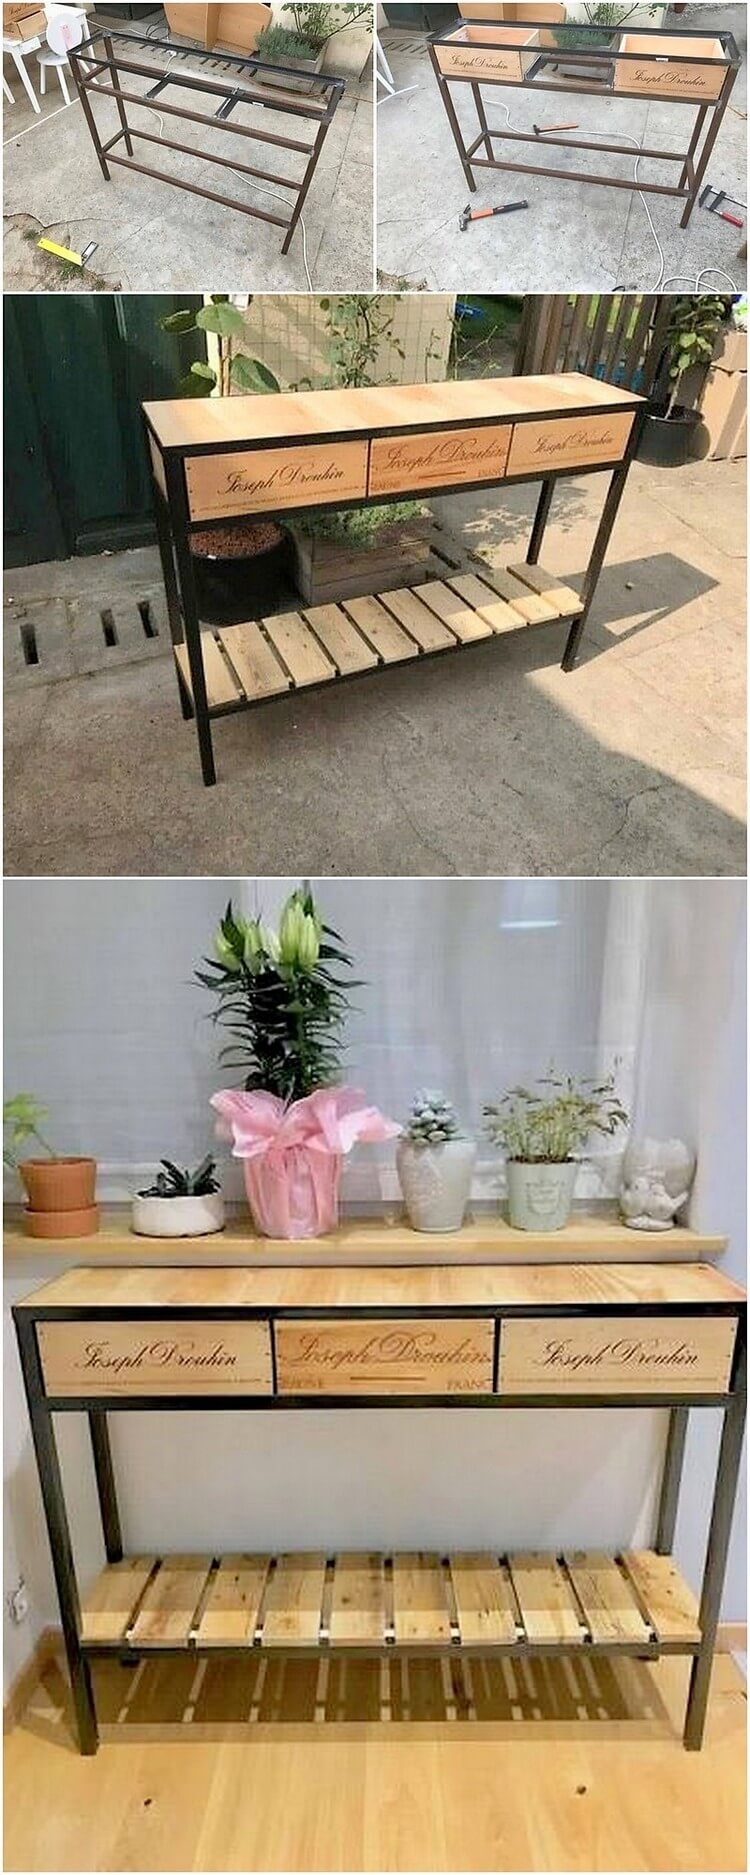 DIY Pallet Table with Steel Feets